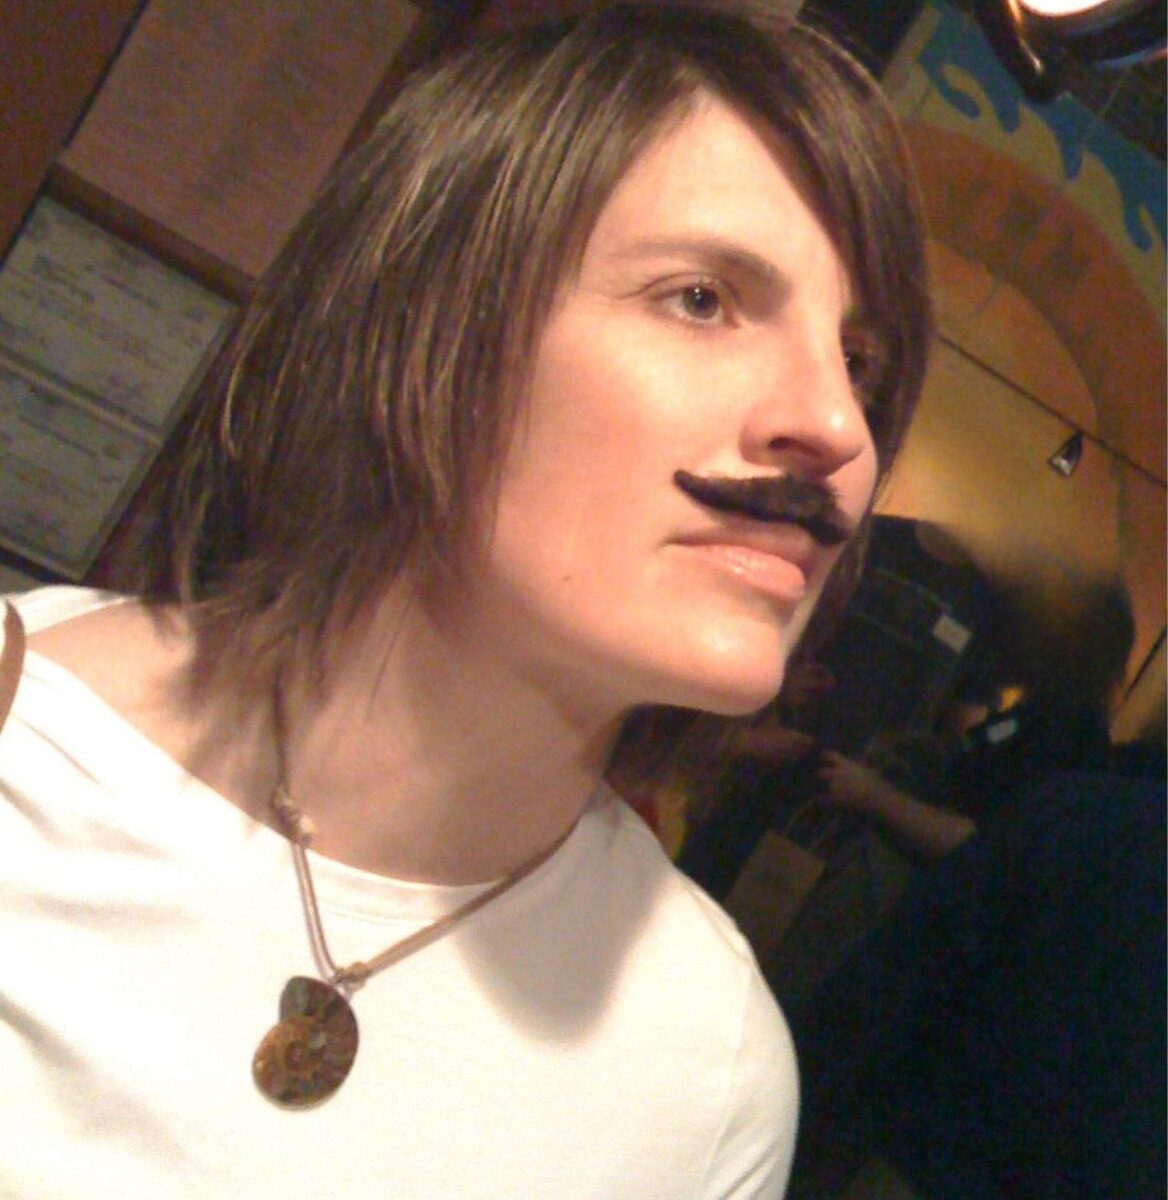 A woman wearing a white shirt looks wistfully toward the ceiling while sporting a face mustache.